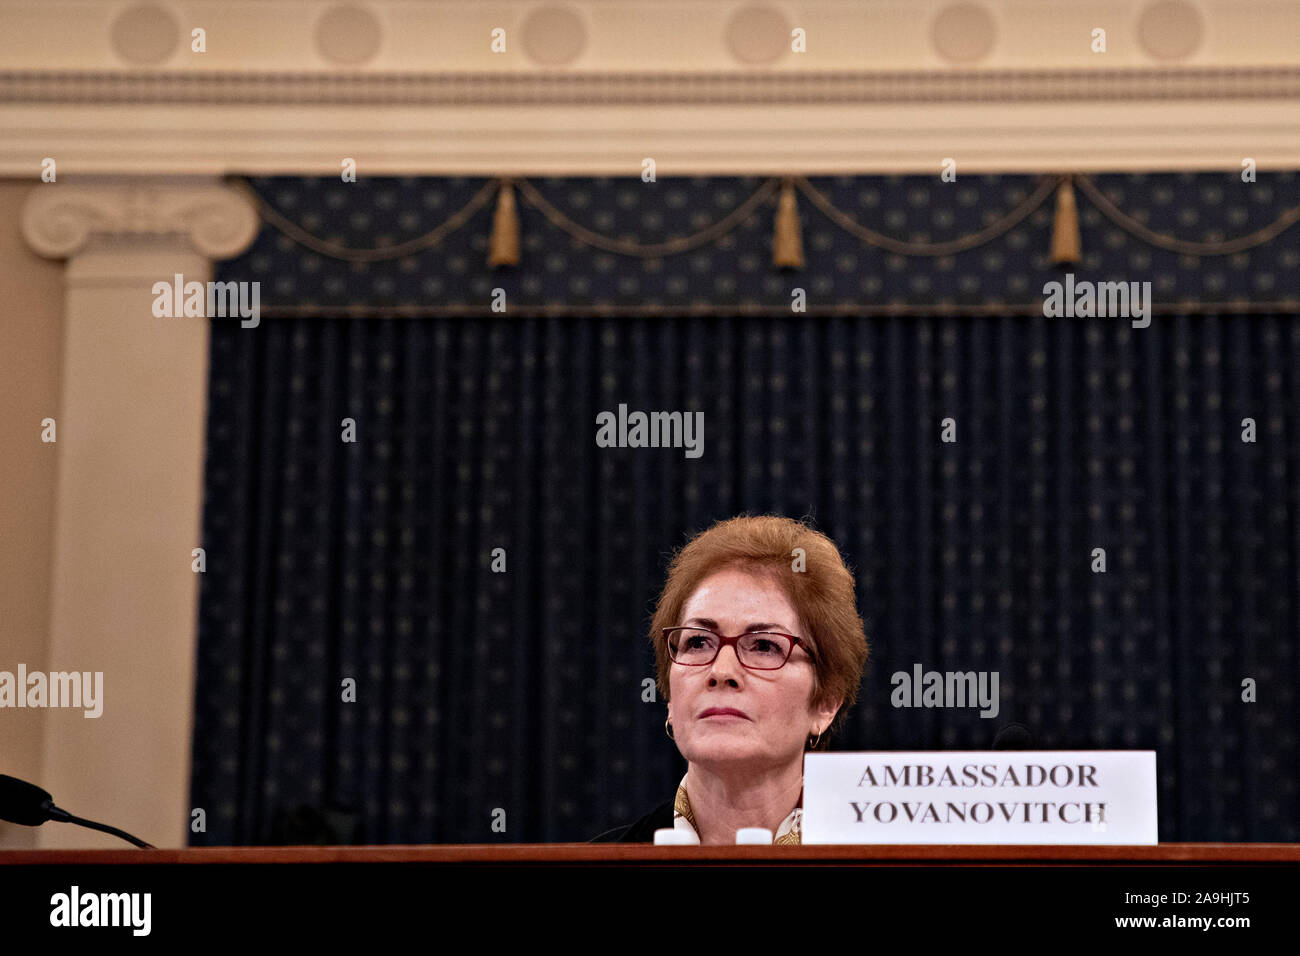 Washington, USA. 15th Nov 2019. Washington, DC, USA. 15th Nov, 2019. Marie Yovanovitch, former U.S. Ambassador to Ukraine, listens during a House Intelligence Committee impeachment inquiry hearing in Washington, DC, U.S., on Friday, Nov. 15, 2019. Yovanovitch testified in private on October 11 that she was called back to Washington after a 'concerted campaign' by President Trump and his allies, including Rudy Giuliani, according to a transcript released later. Credit: Andrew Harrer/Pool via CNP | usage worldwide Credit: dpa/Alamy Live News Stock Photo